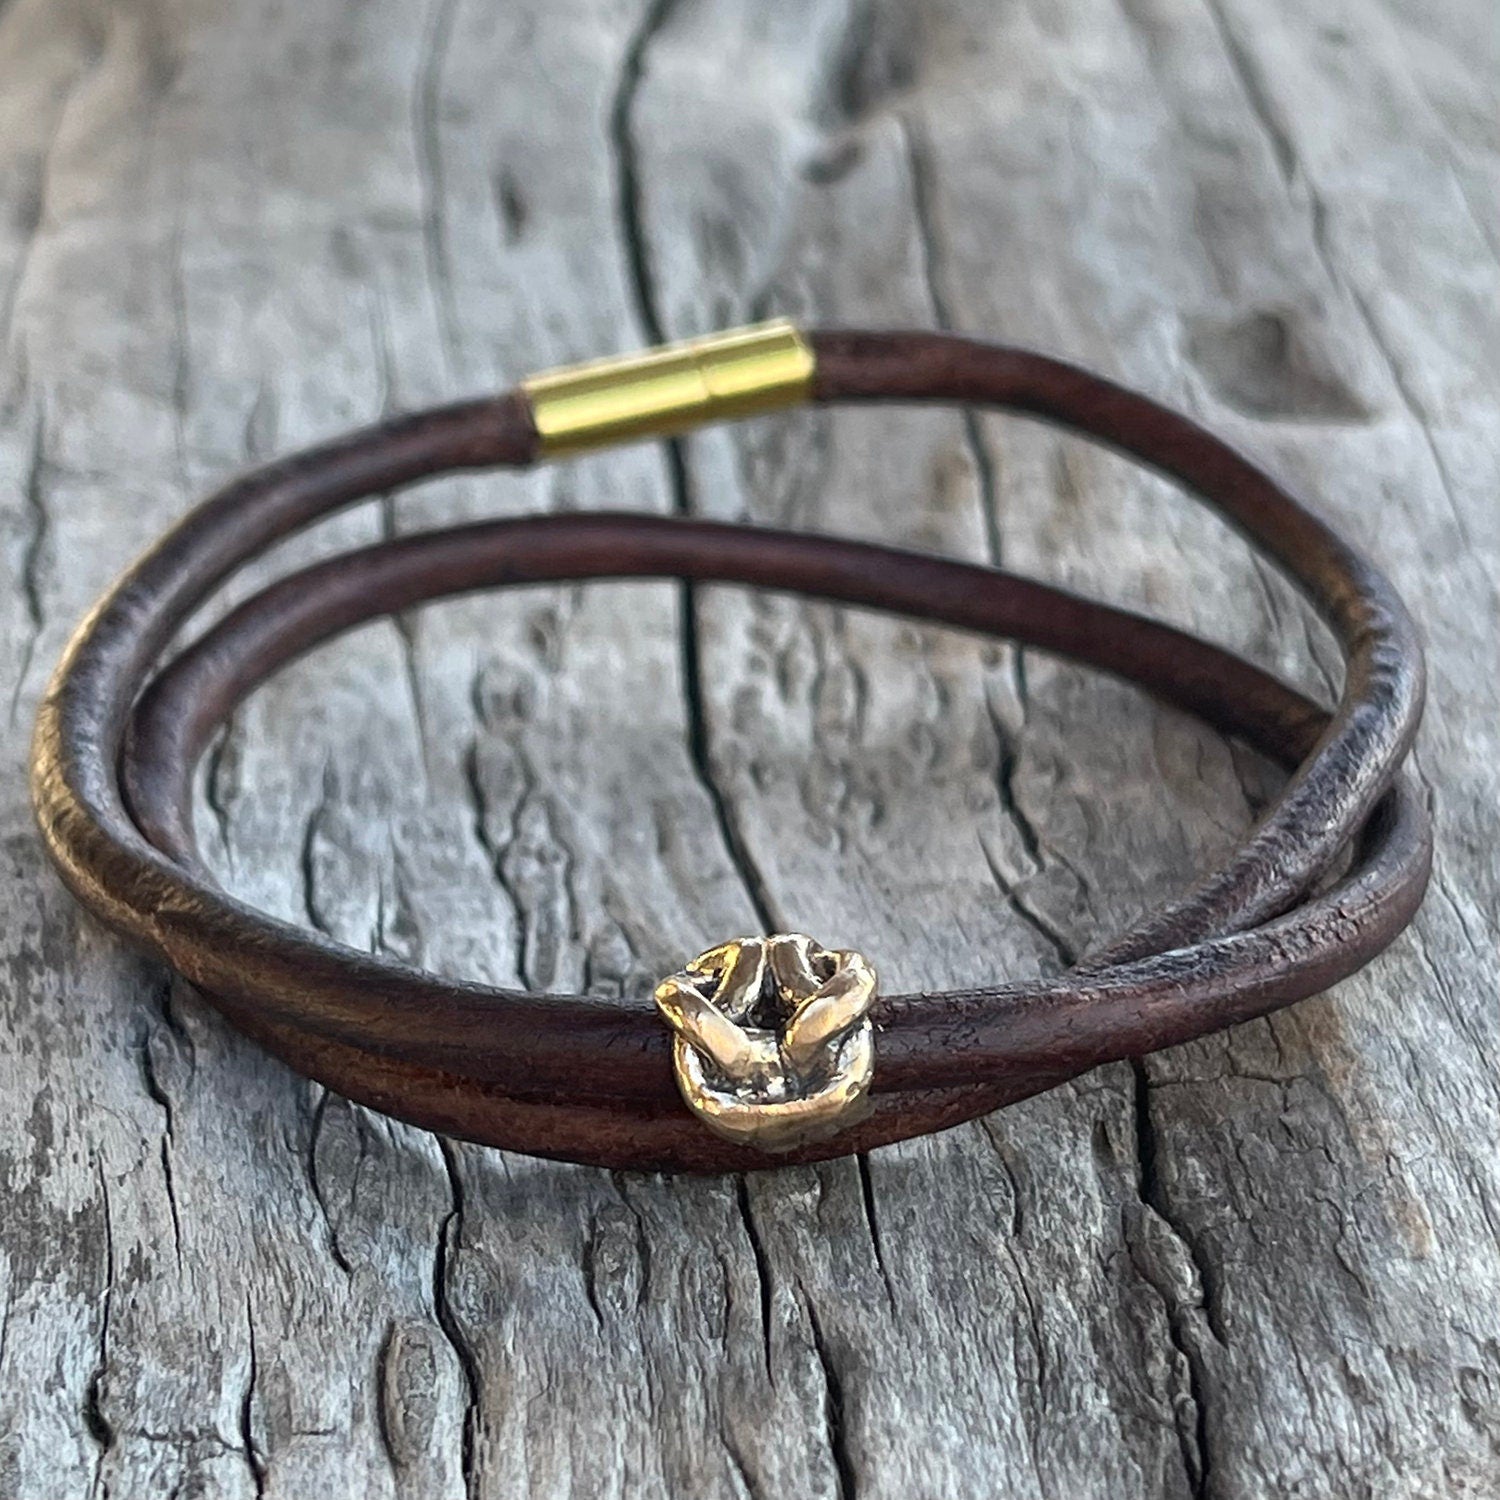 Handmade Bronze Knot Double Wrap 4MM Leather Bracelet with Magnetic Closure